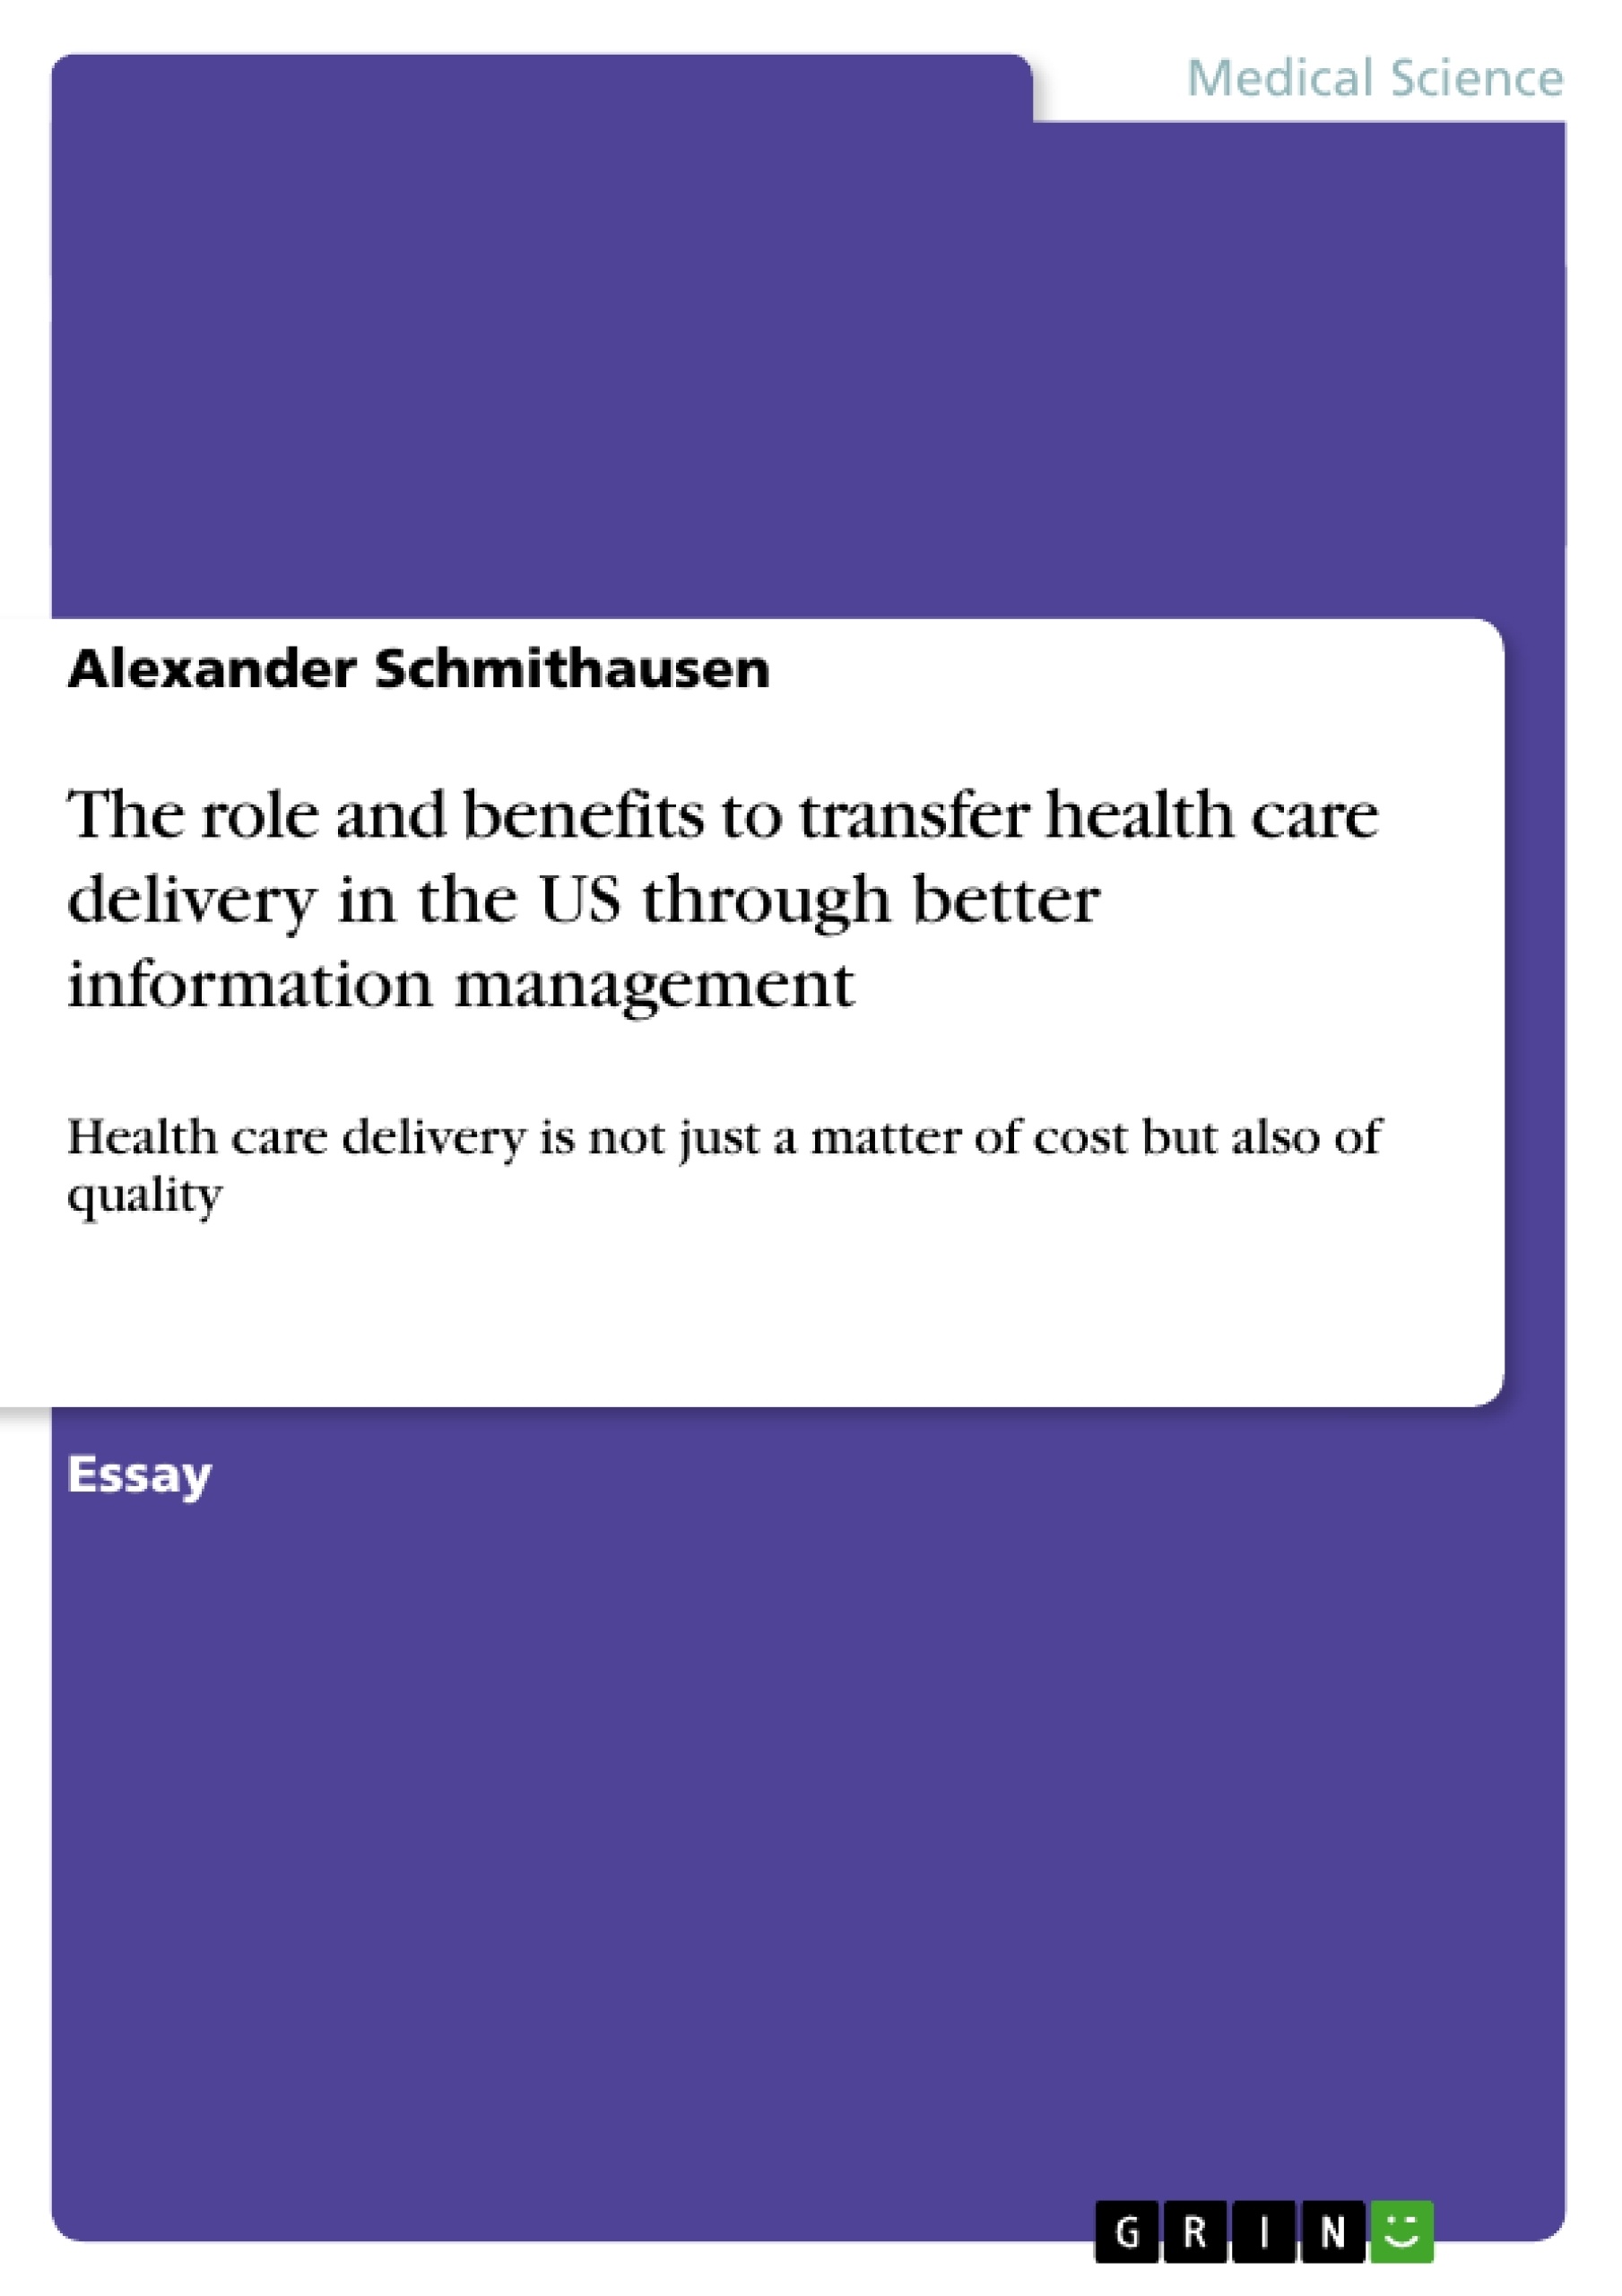 Title: The role and benefits to transfer health care delivery in the US through better information management 